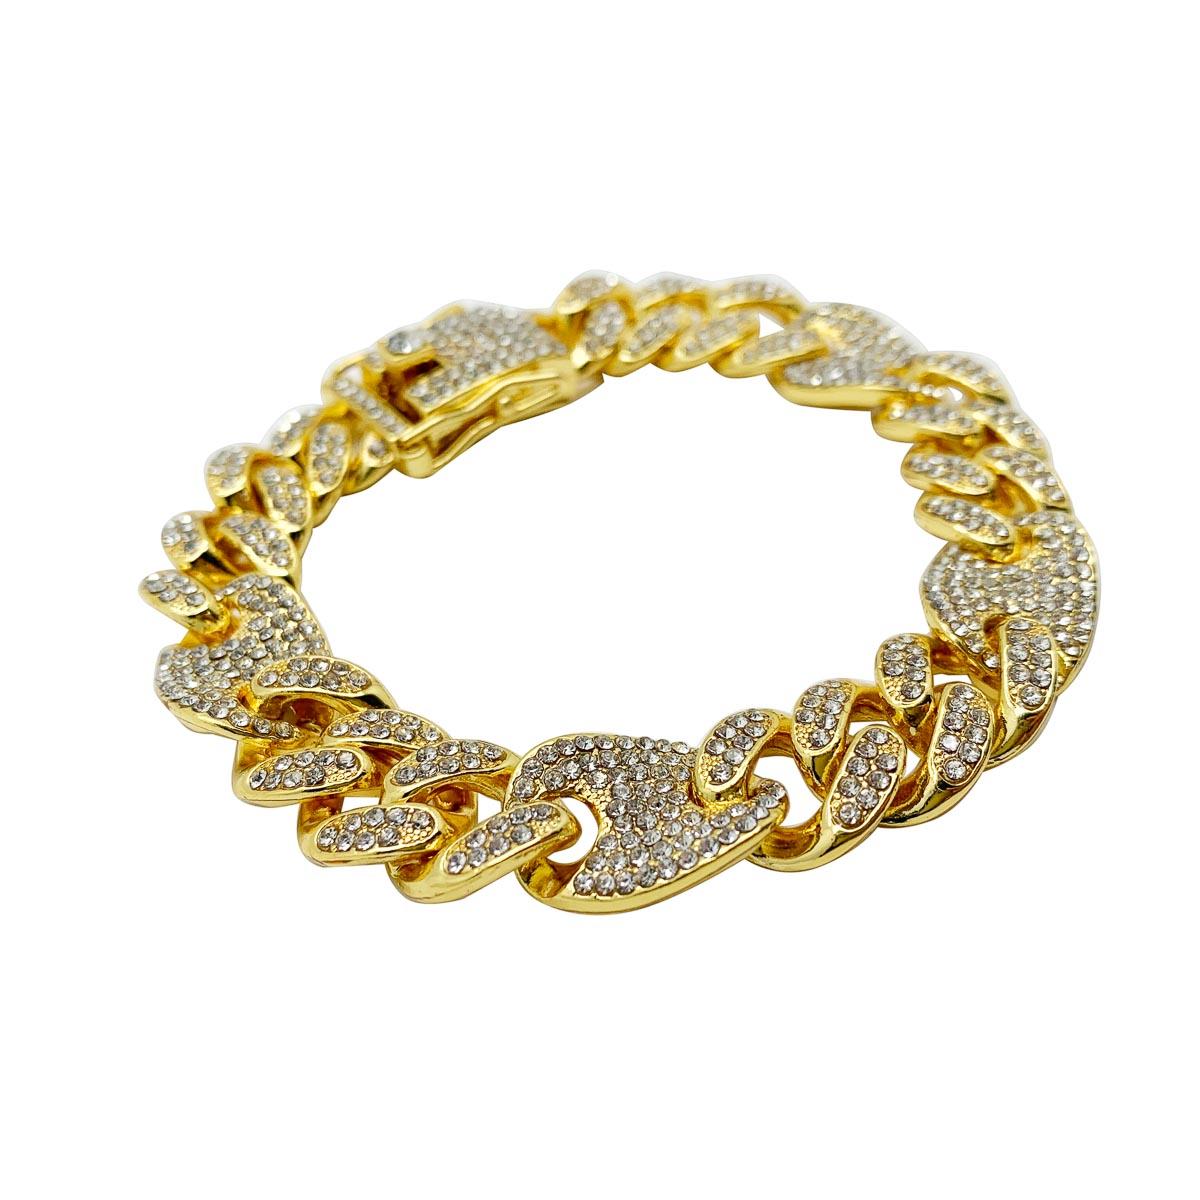 A Crystal Chain bracelet. Featuring chunky links set with crystals to dramatic effect.

Condition: Very good without damage or noteworthy wear.
Materials: Gold plated metal, glass crystal
Fastening: Push in clasp with safety clasp
Approximate